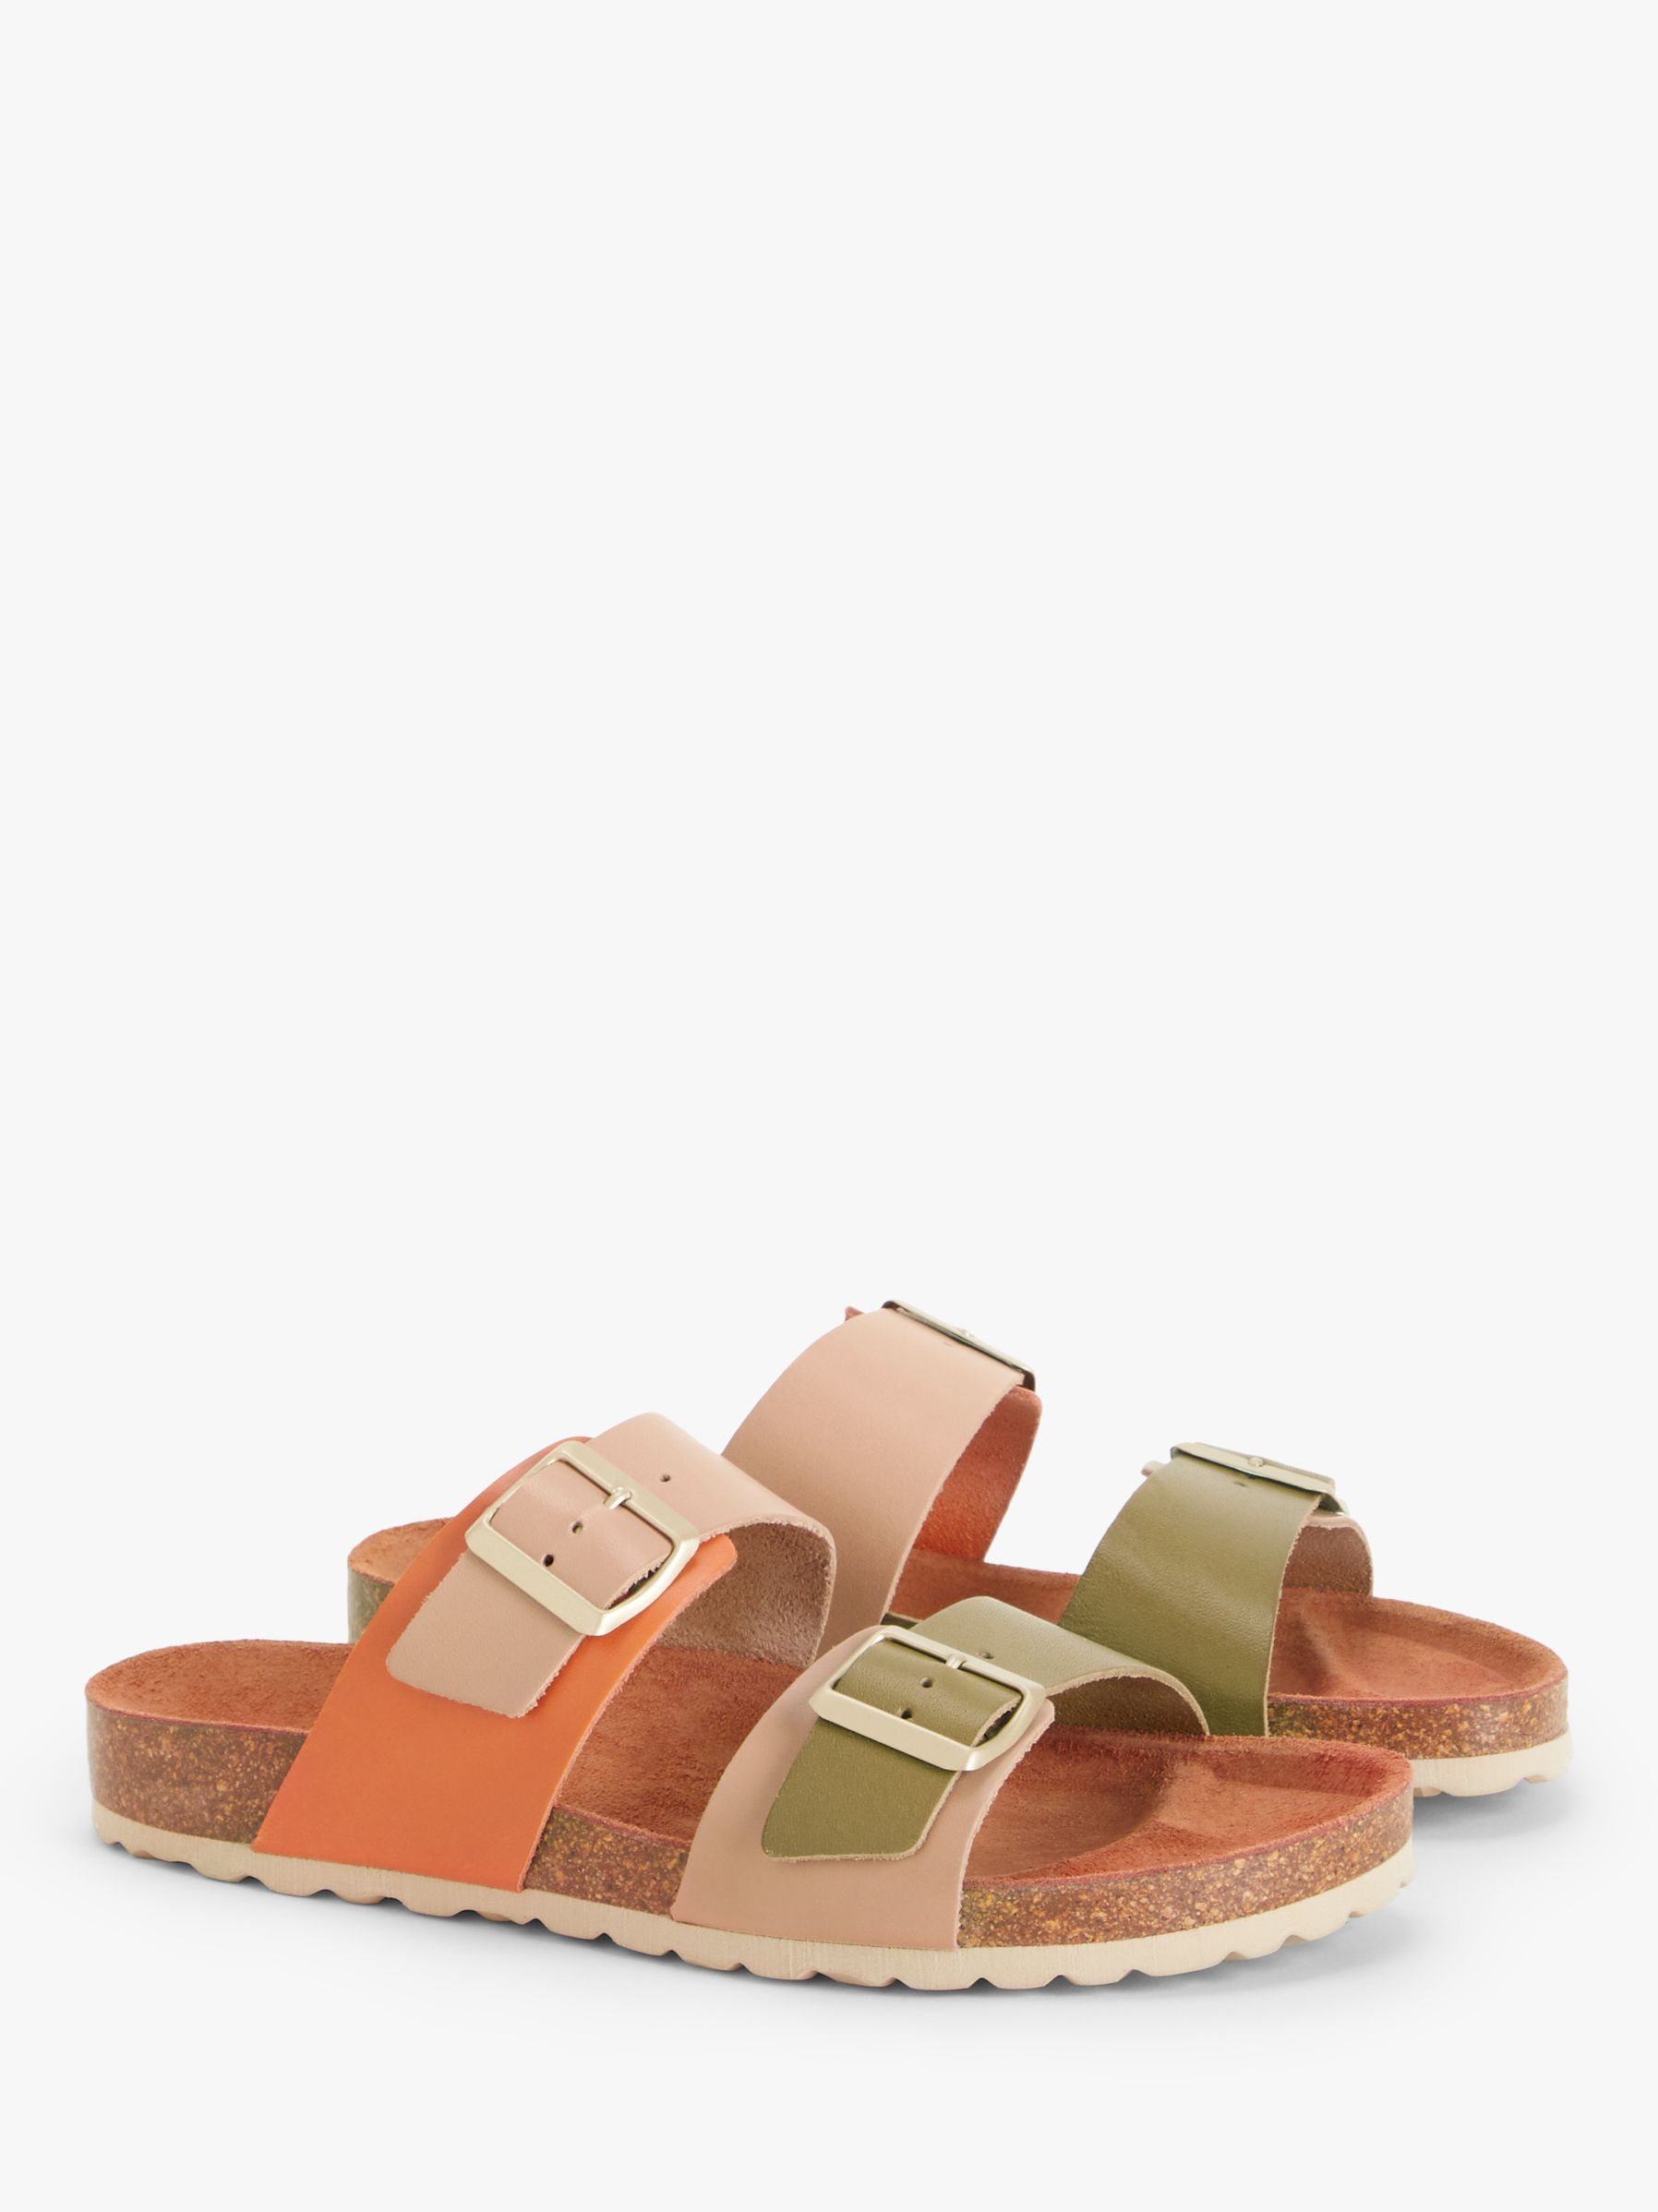 Buy John Lewis Lolly Leather Sandals Online at johnlewis.com